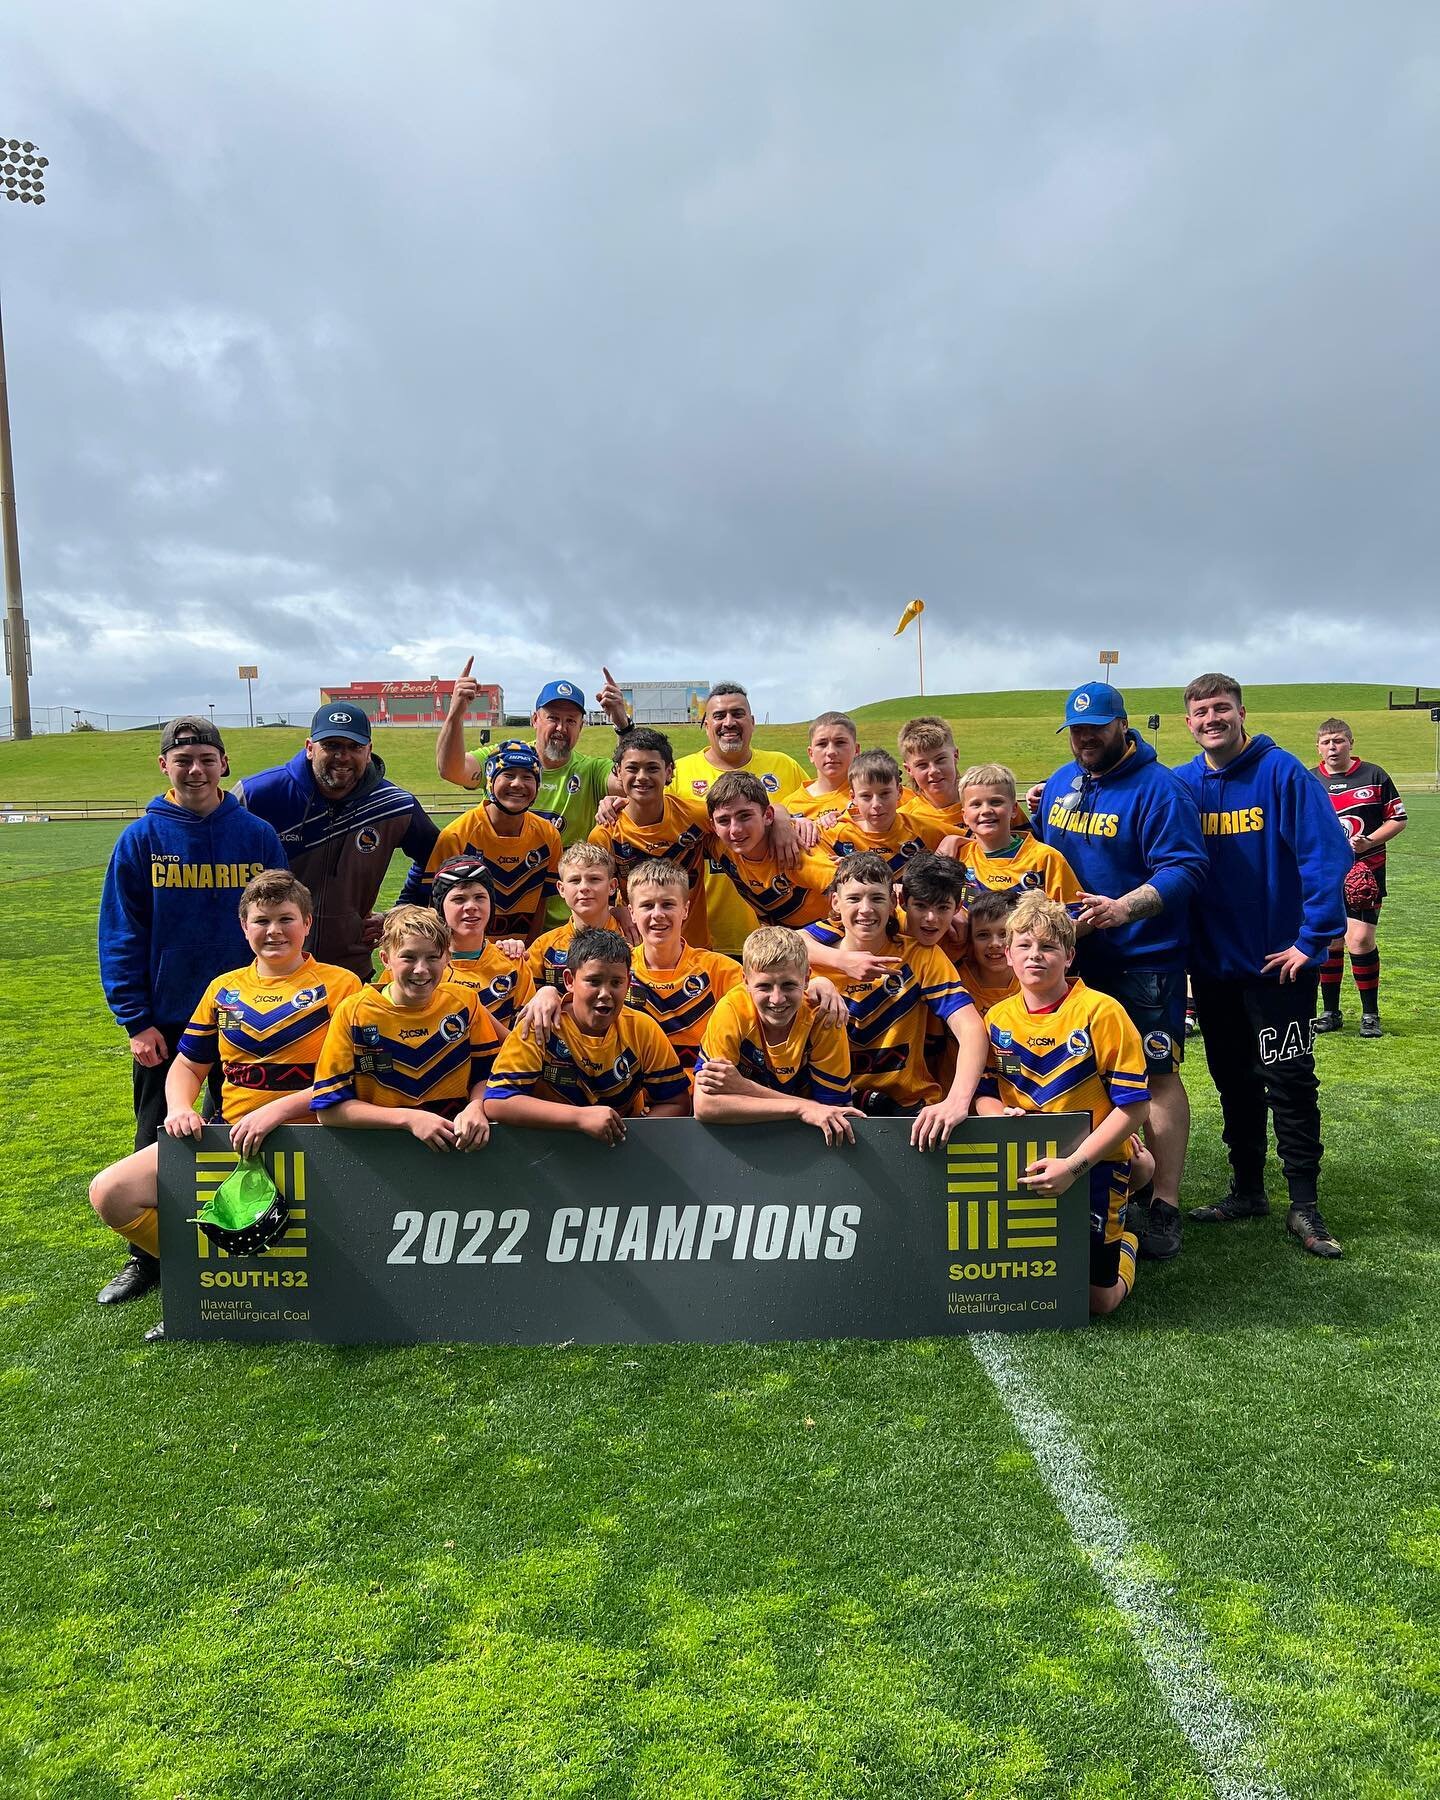 👏BIG CONGRATS to the 13-1 boys on their Grand Final win today against Collies! Good on you boys, enjoy the day as champs! 😃 

#UpTheCanaries #DaptoCanaries #DaptoProud 🐤